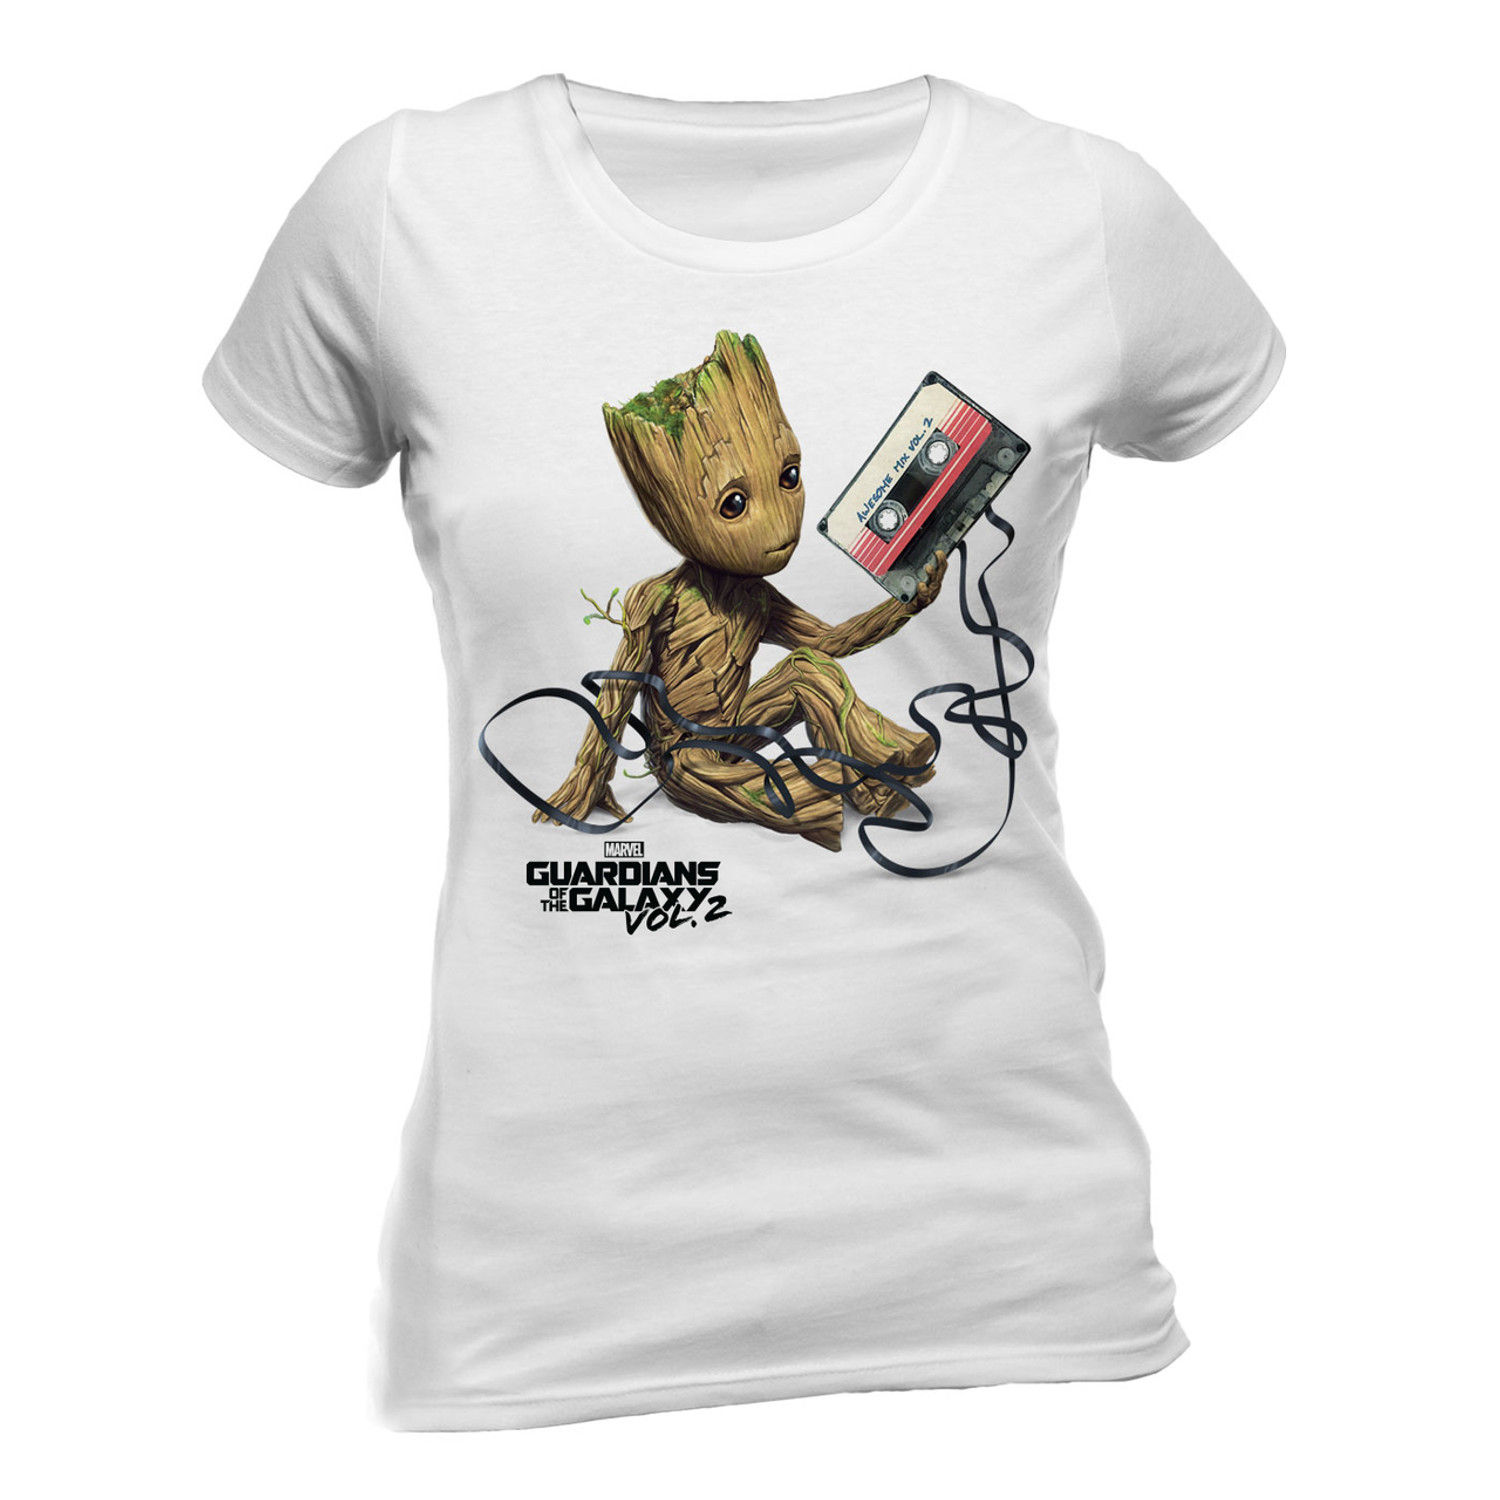 Baby Groot Guardians of the Galaxy Vol. 3 Marvel Cardboard Cutout / Standee